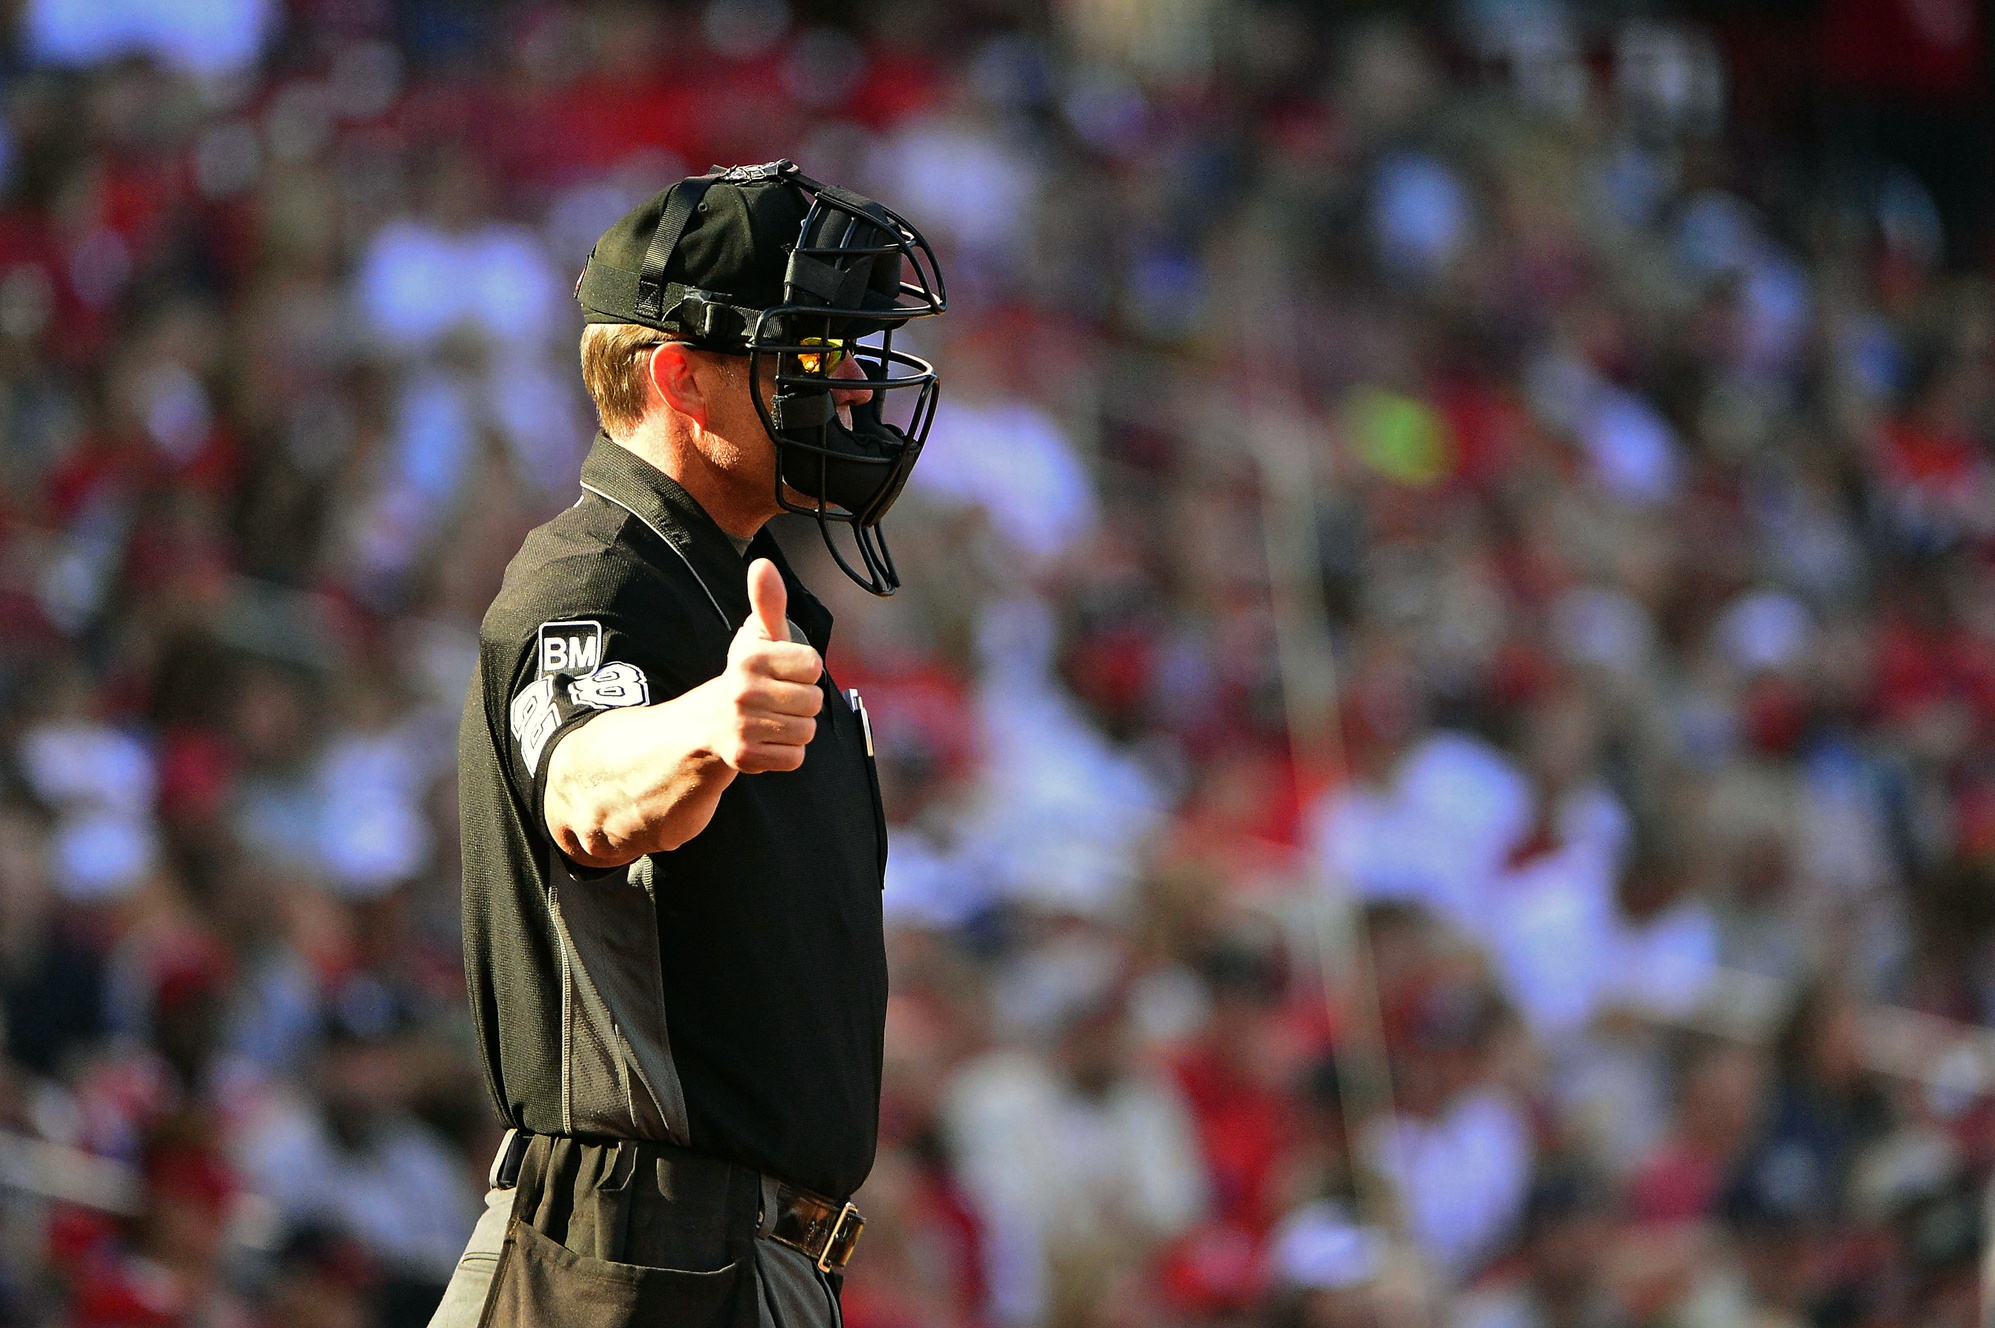 So You Want to Be an Umpire?